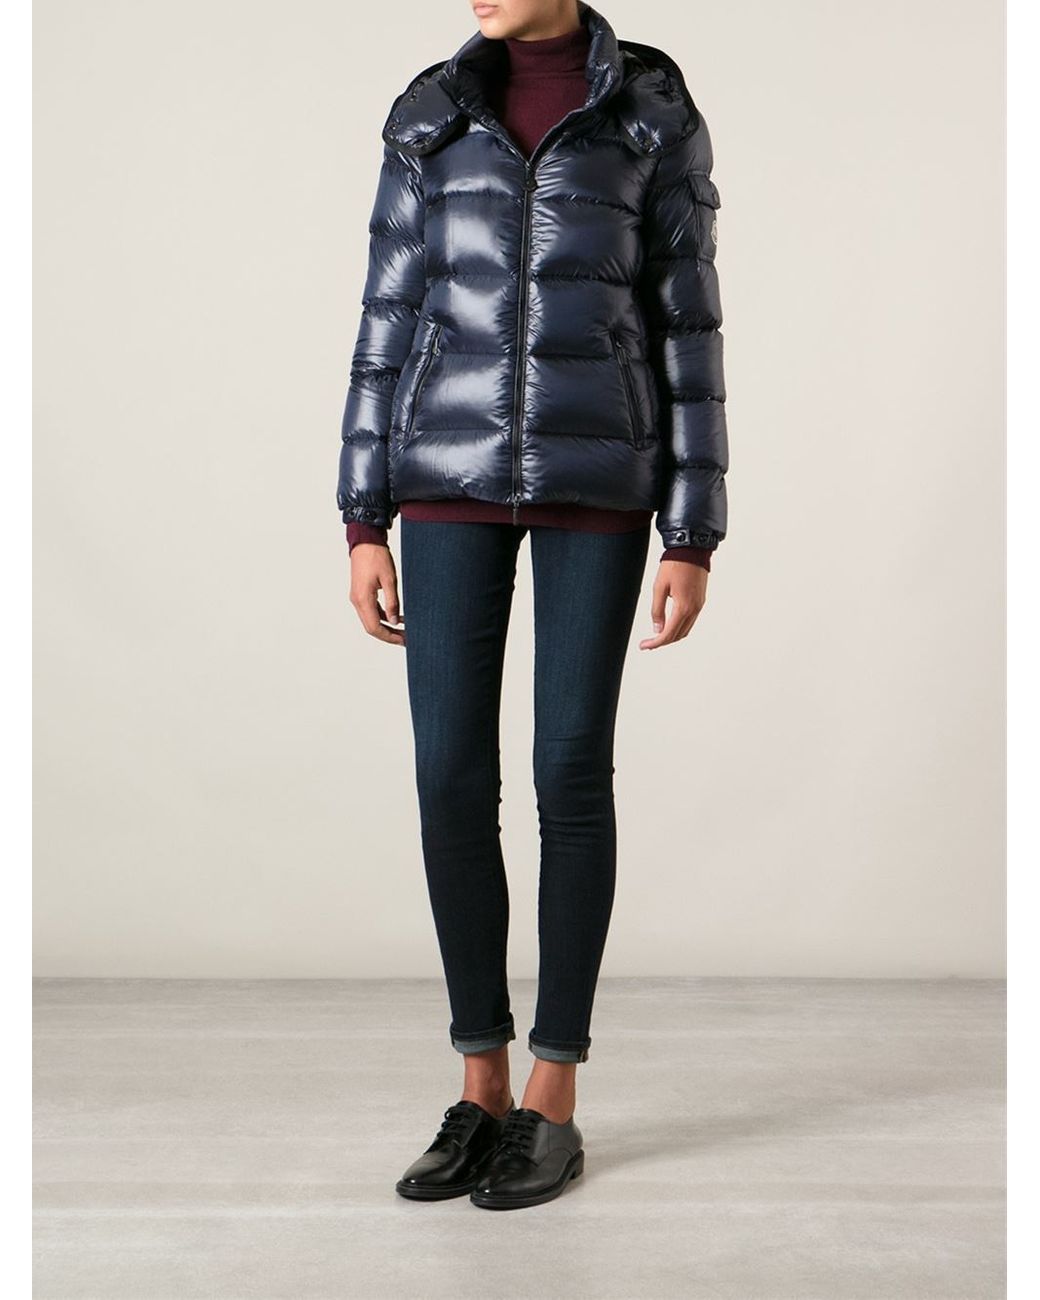 Moncler 'Berre' Padded Jacket in Blue | Lyst